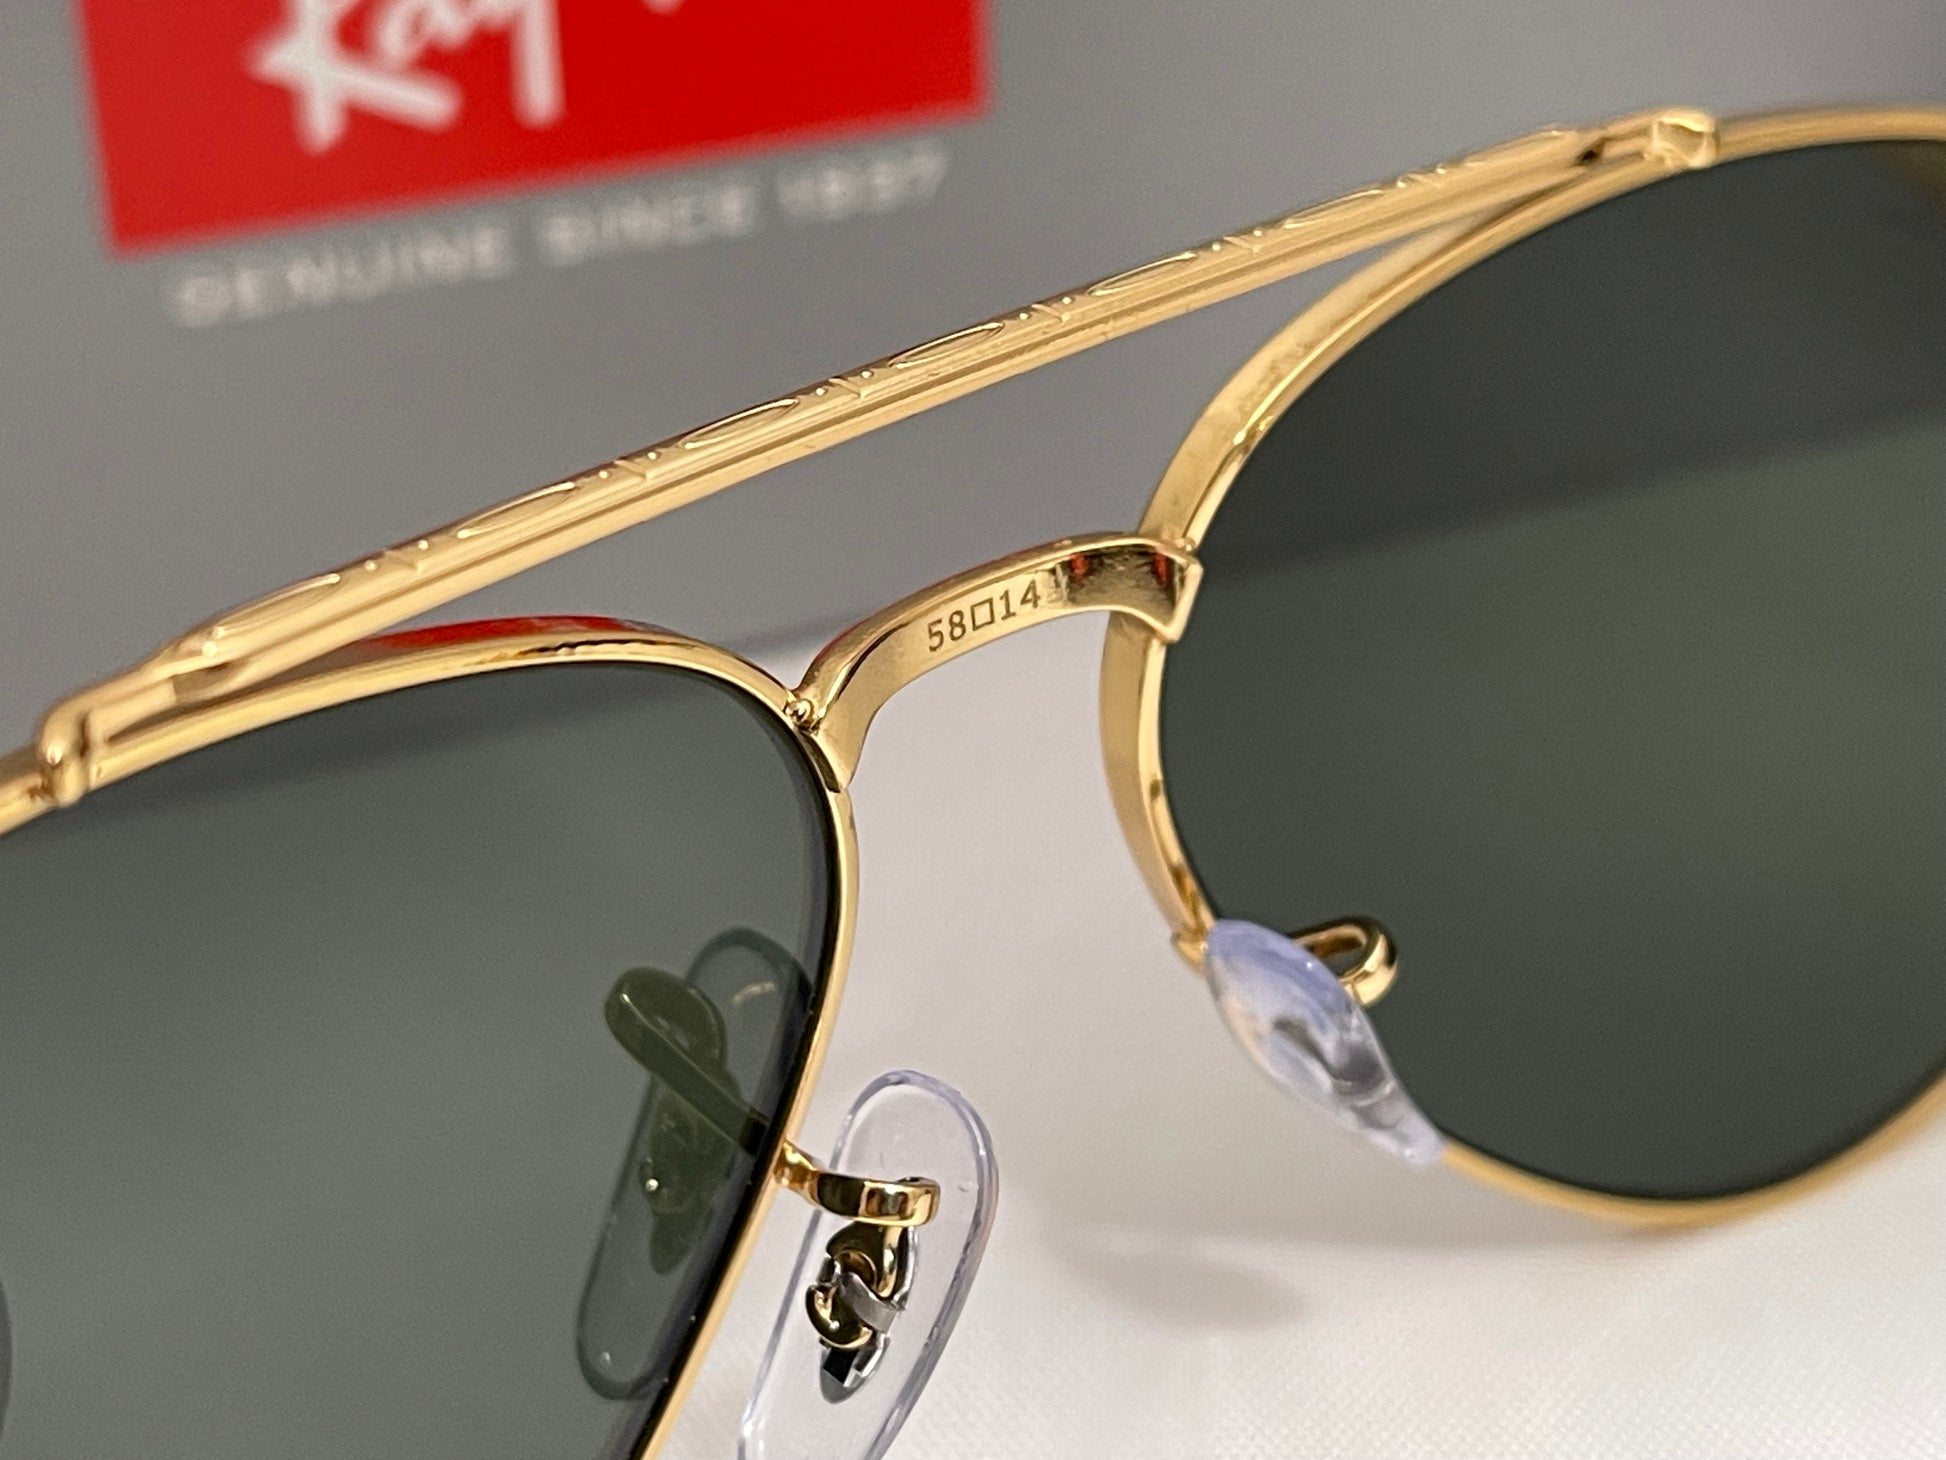 Ray-Ban New Aviator RB 3625 9196/31 58mm Gold Frame G15 Lens – Shade Review  Store